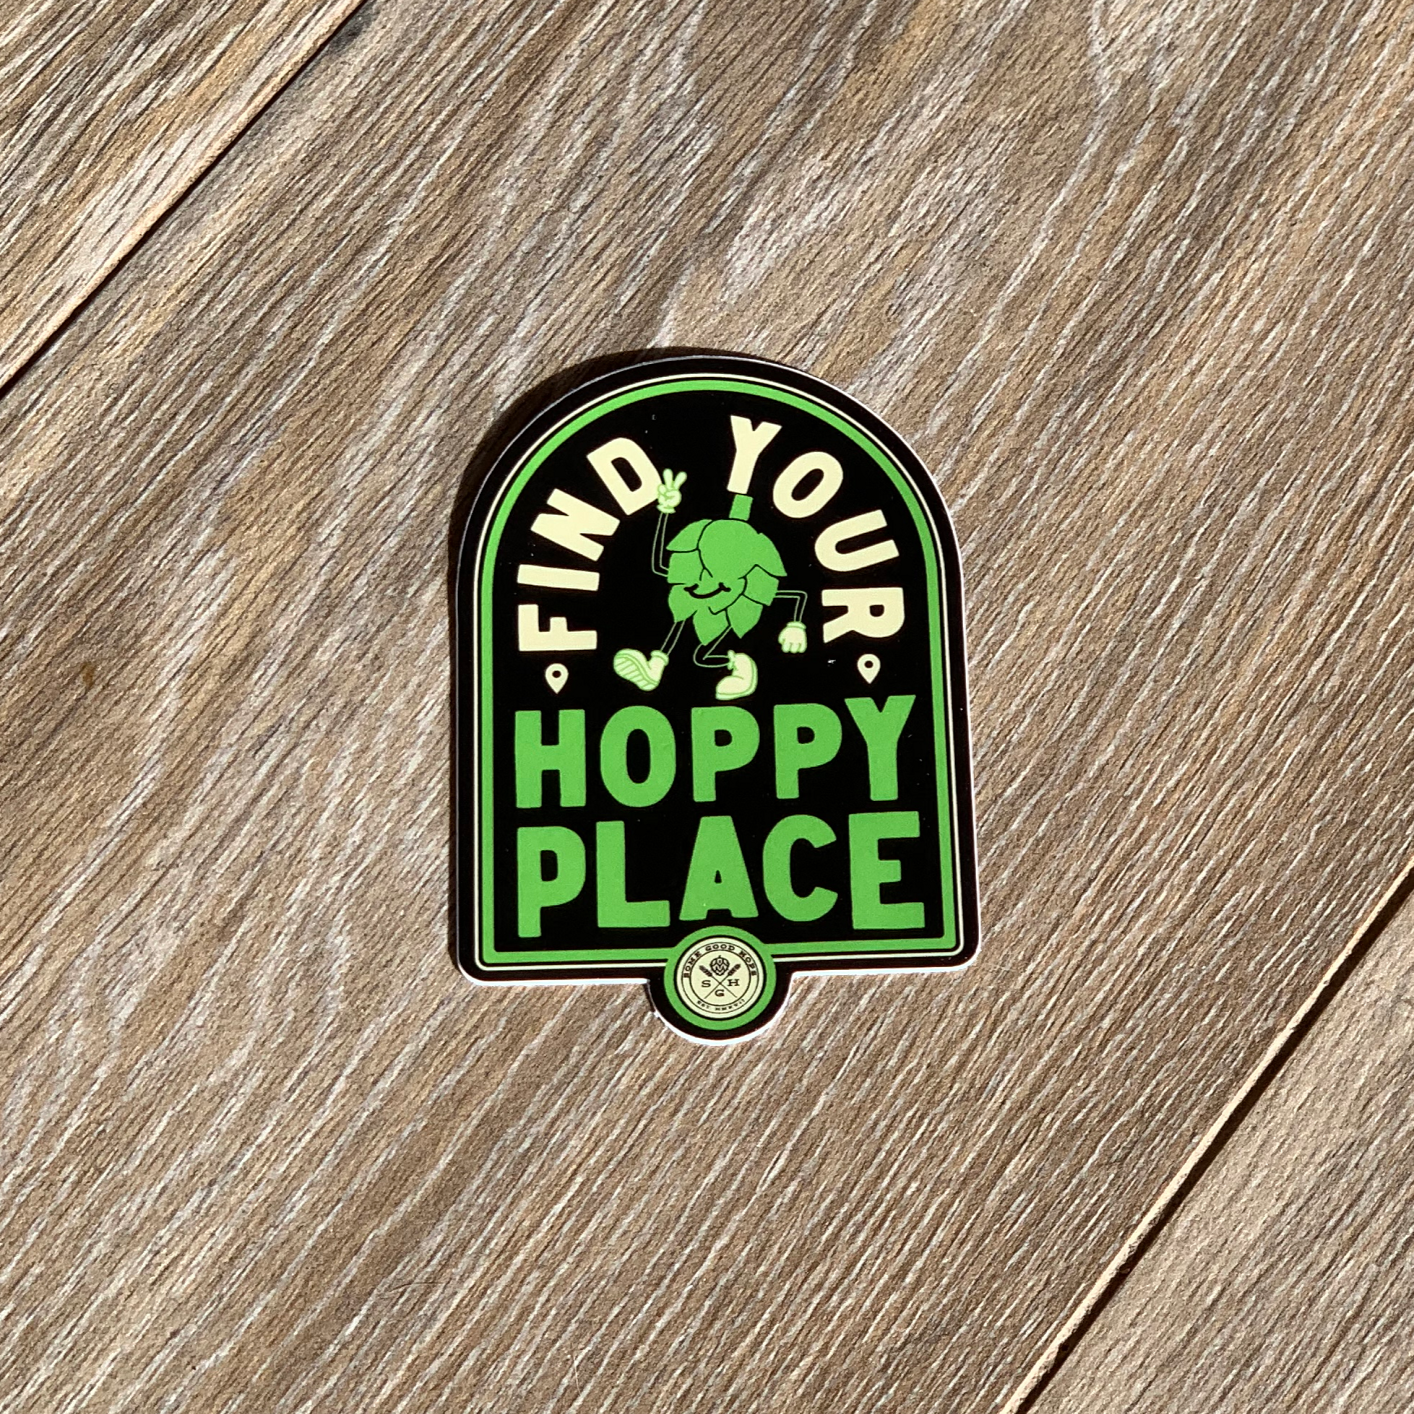 Some Good Hops Find Your Hoppy Place 2.0 Sticker